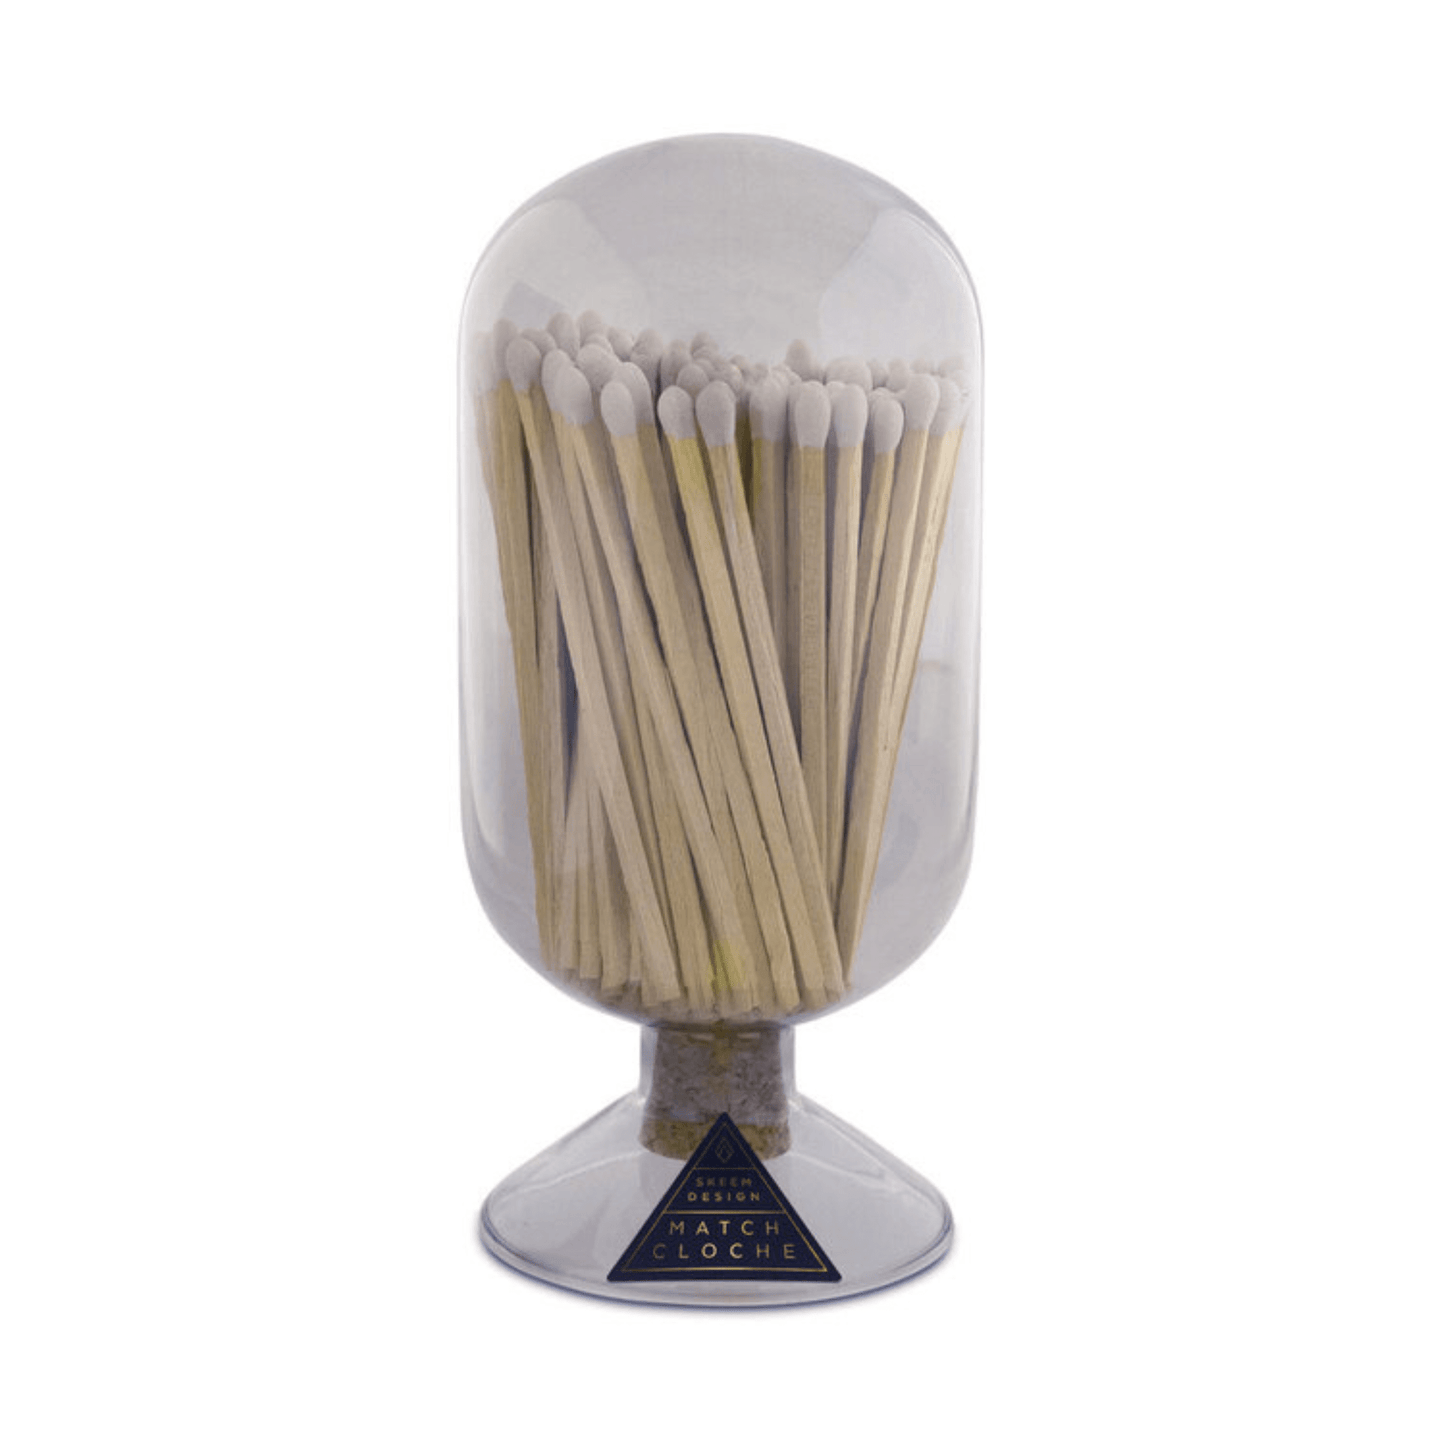 Primary Image of Smoke Cloche Matches